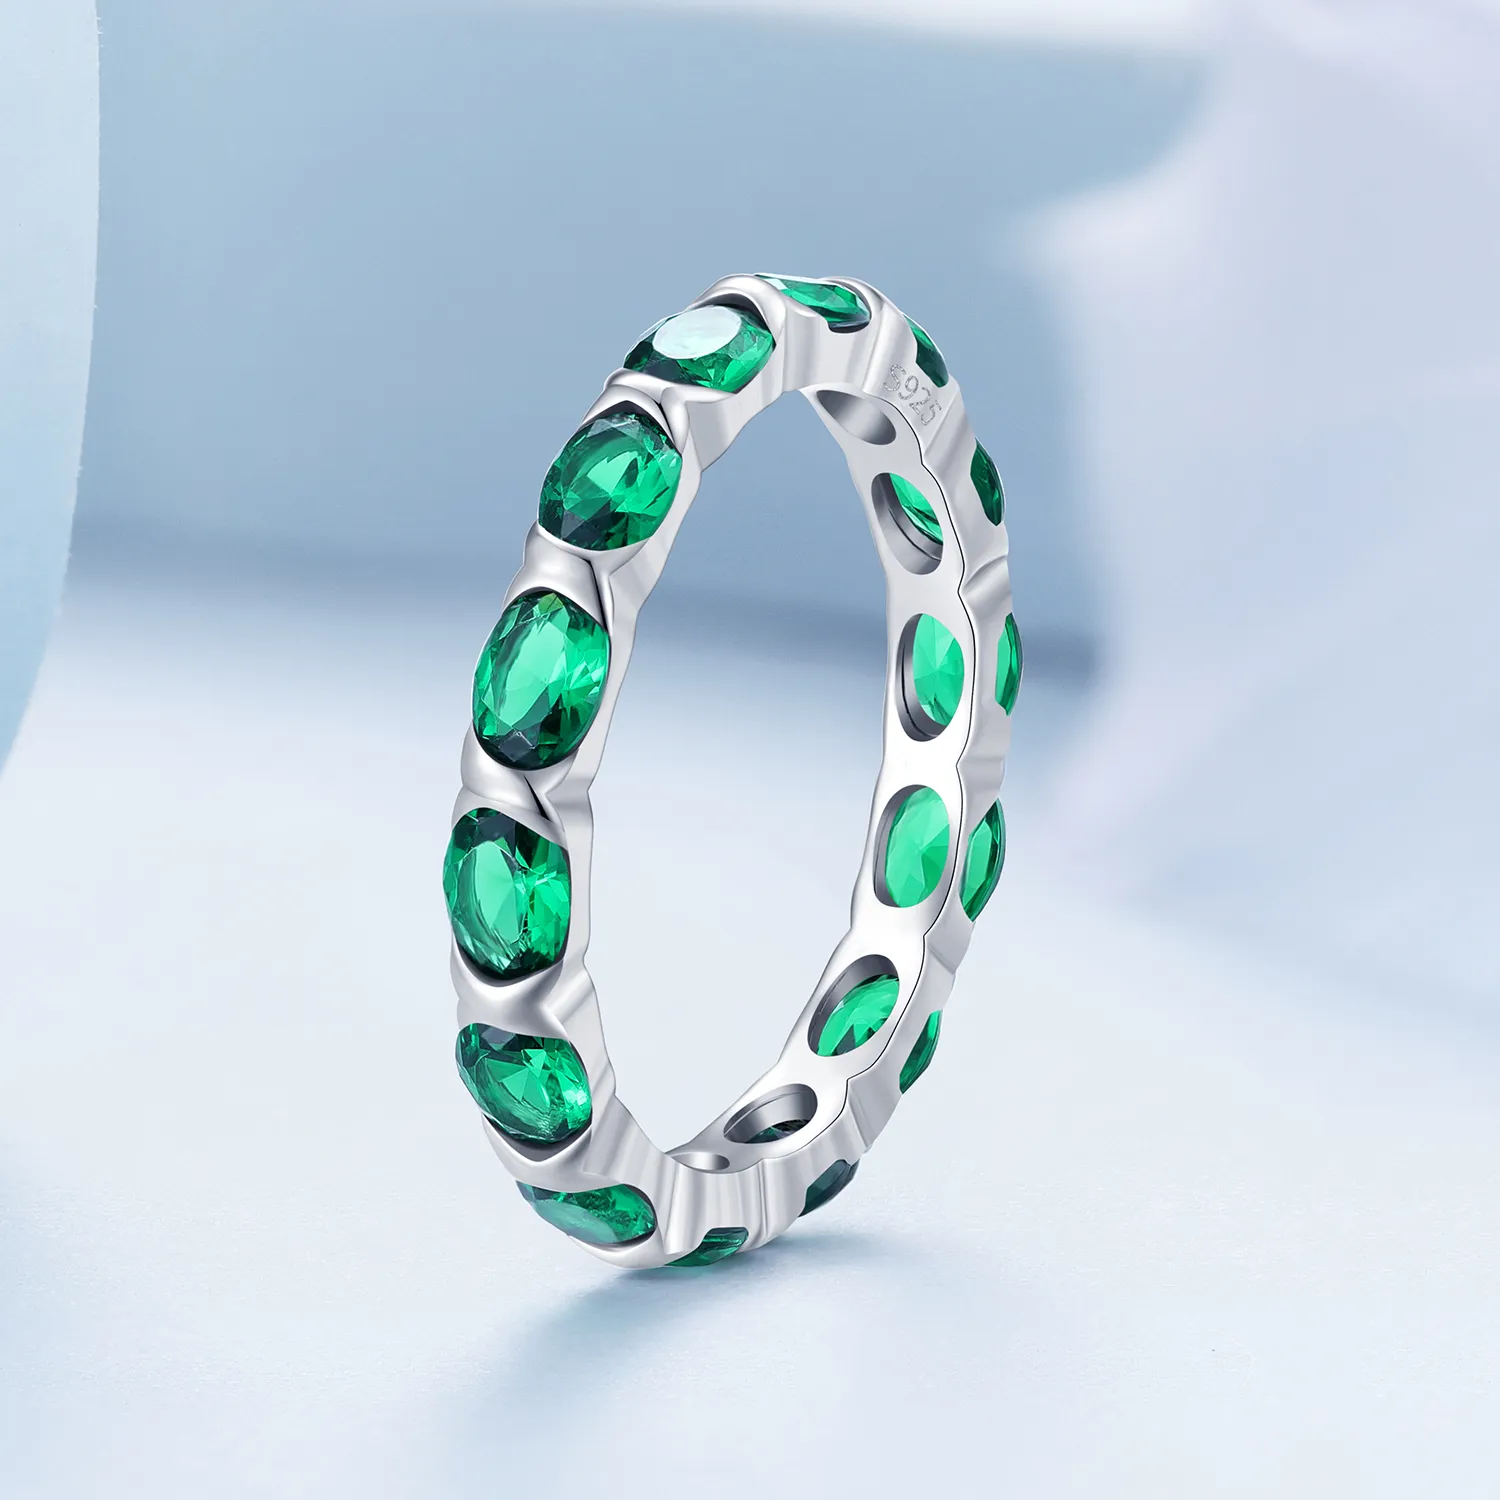 Pandora Style Full Pave Green Spinel Ring - BSR432